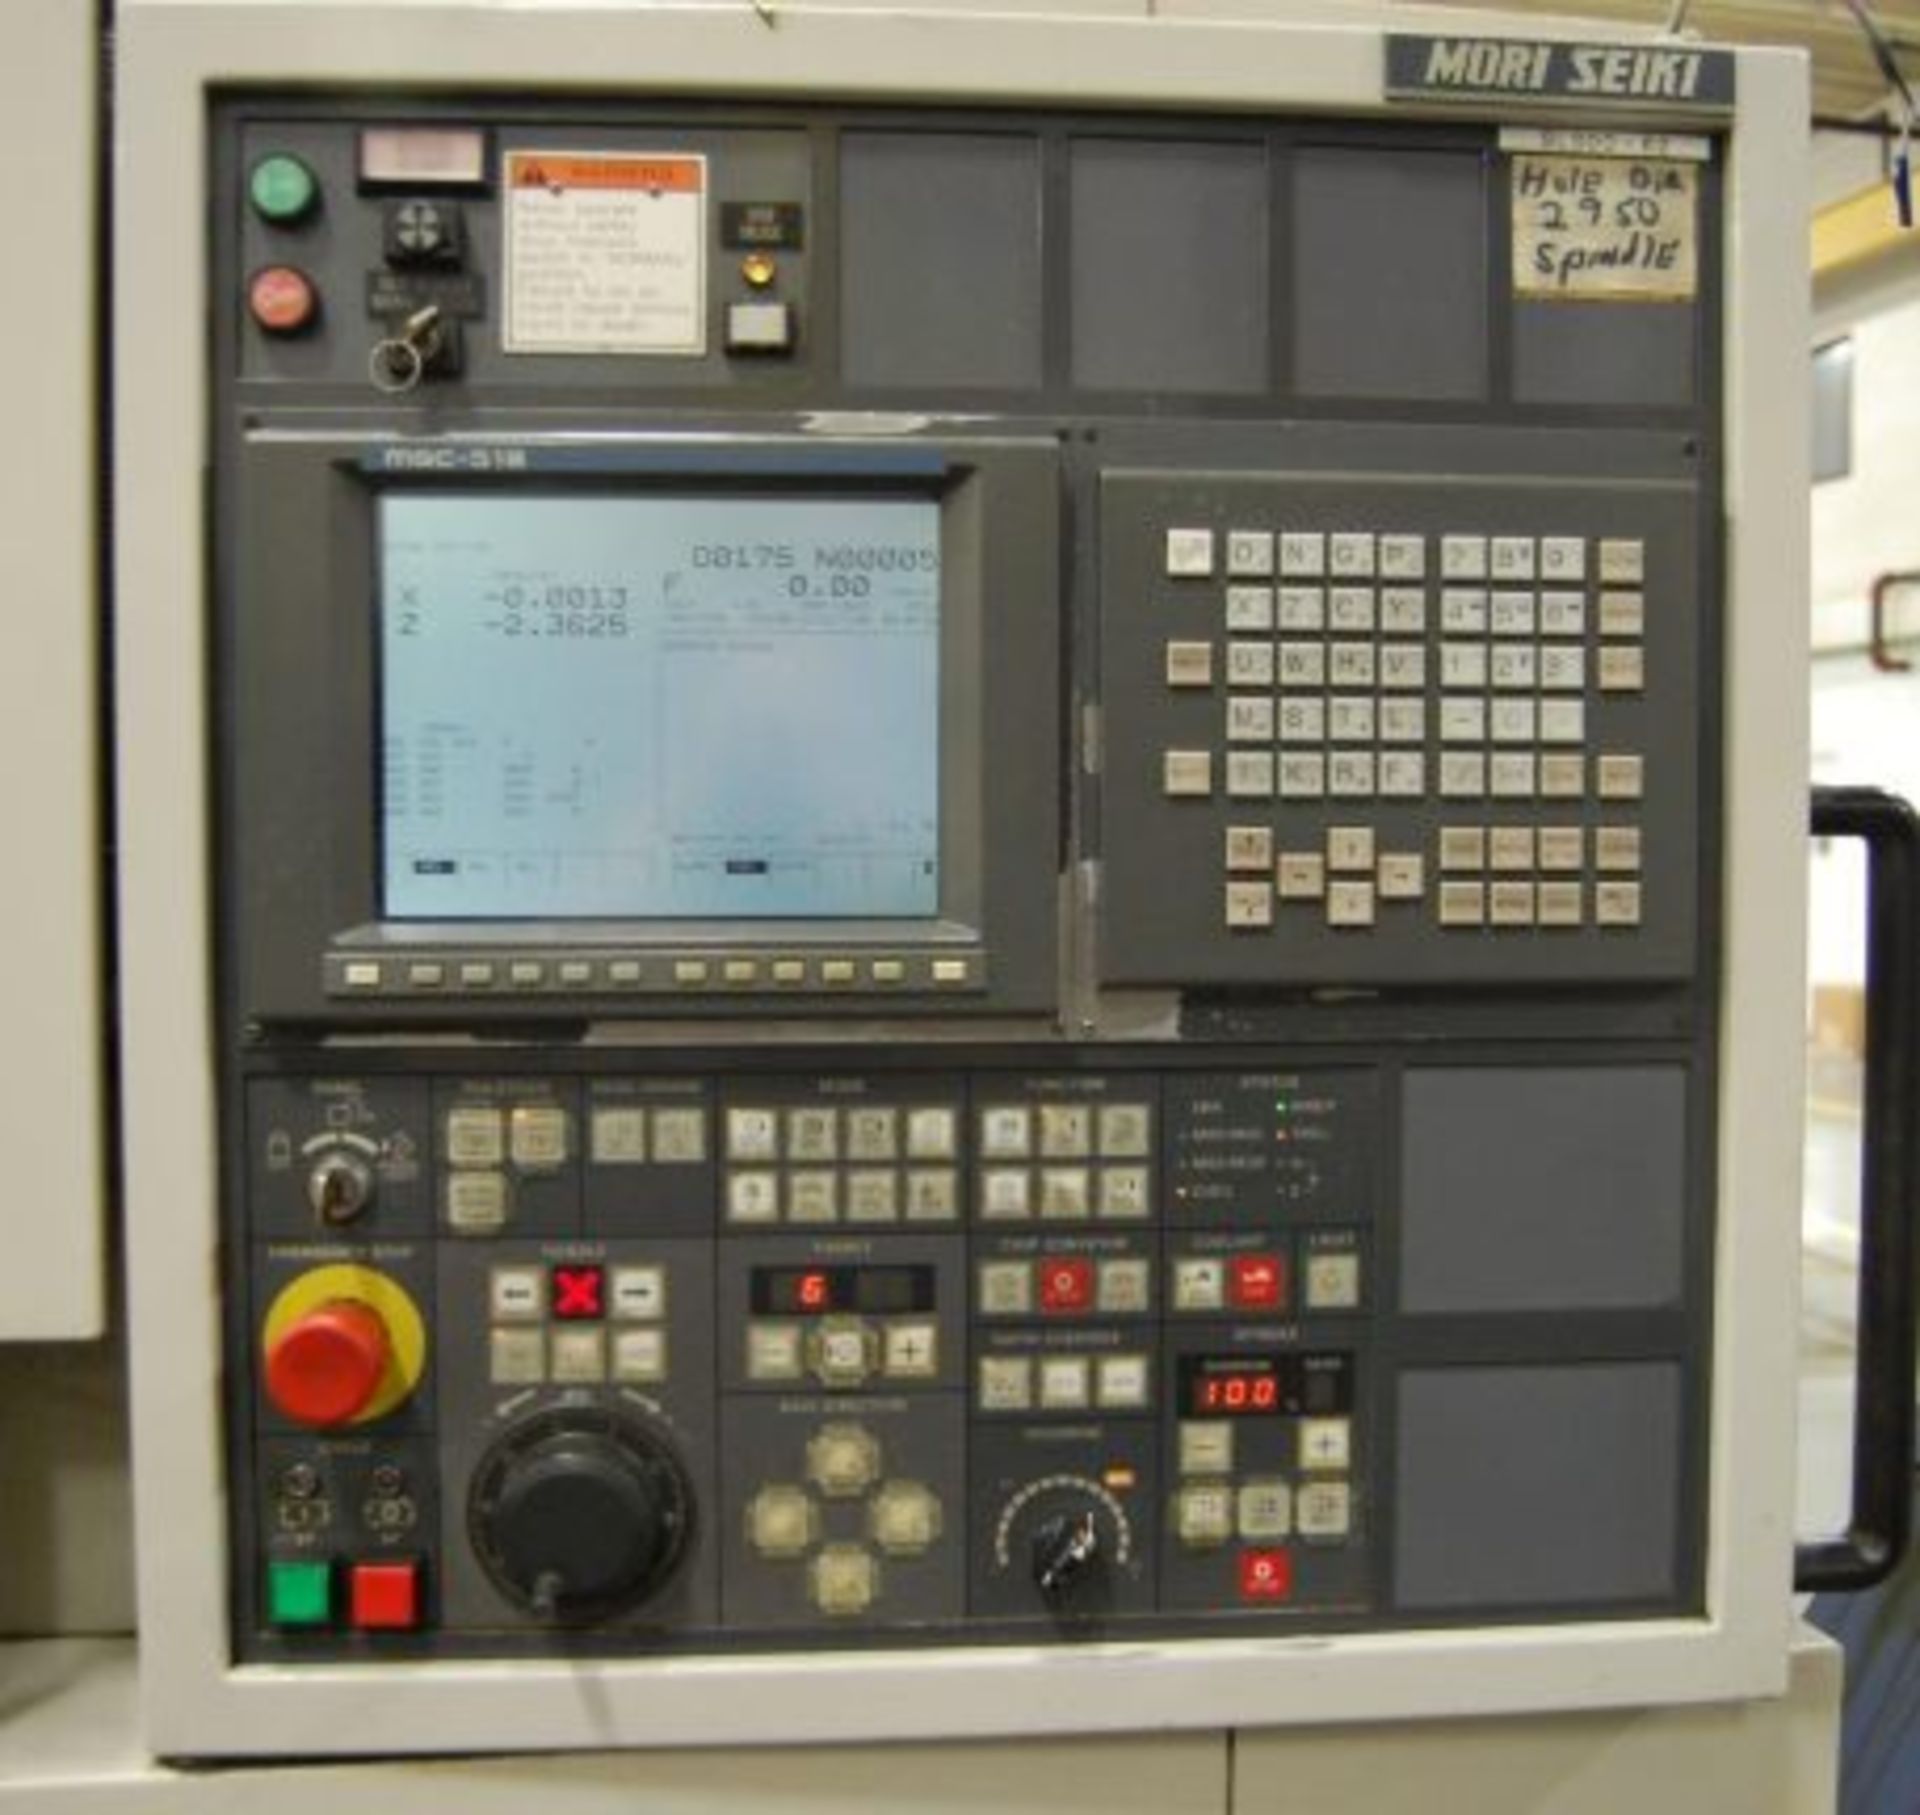 MORI SEIKI SL300A CNC Slant Bed Turning Center, 28.1" Swing Over Bed, 19.7"   Swing Over Cross - Image 8 of 10